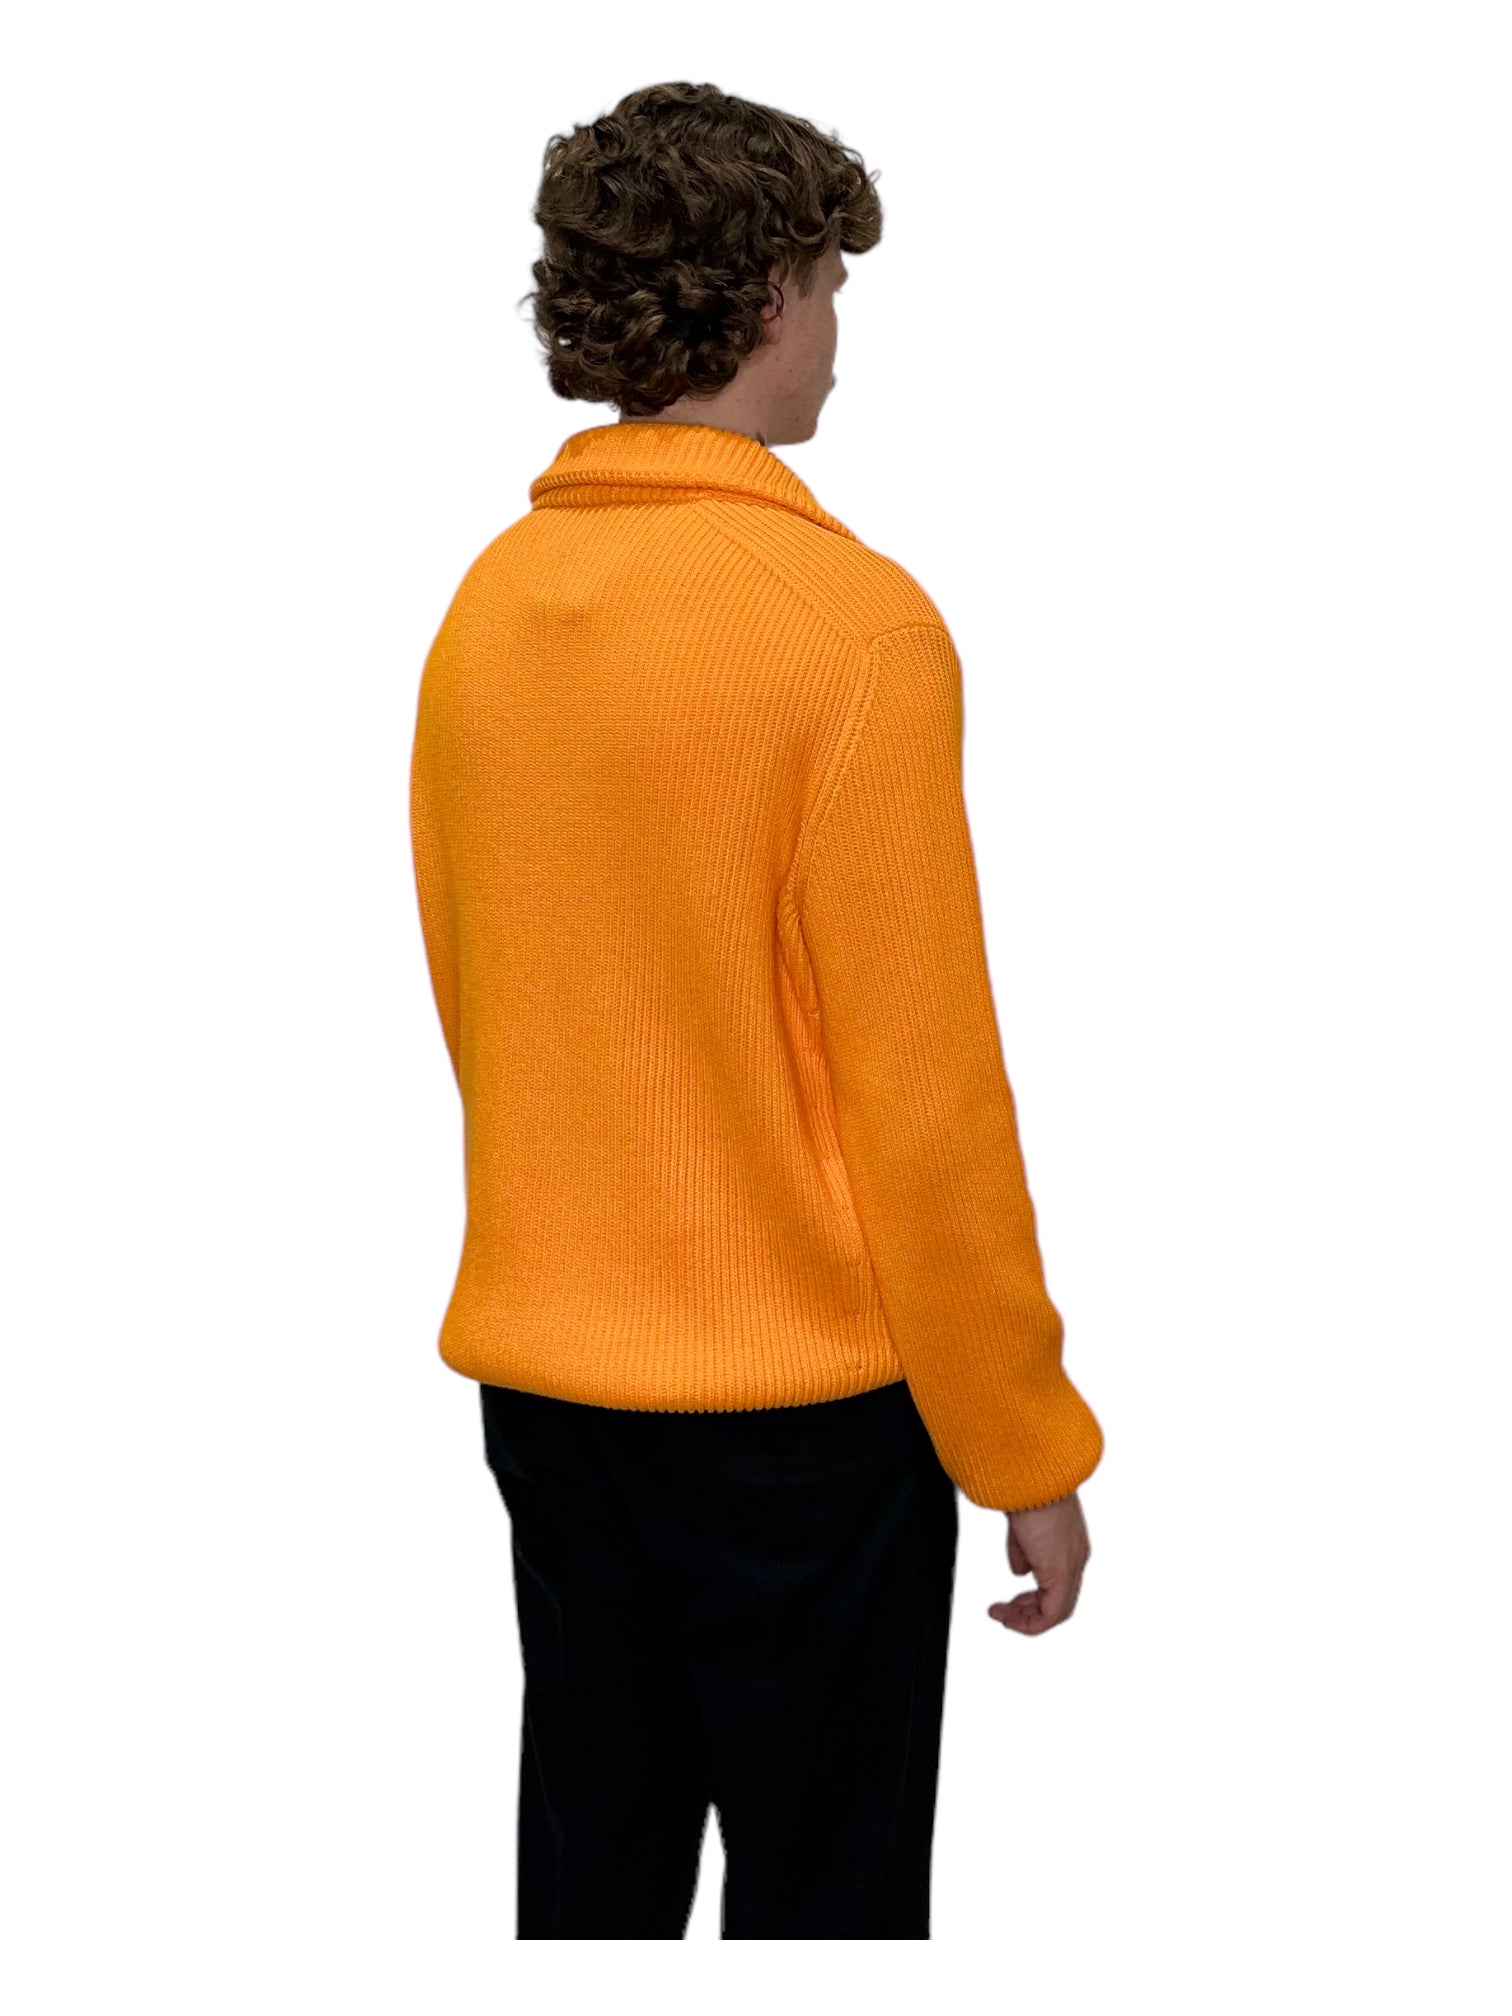 Prada Ribbed Orange Knit Quarter-Zip Sweater - Genuine Design Luxury Consignment for Men. New & Pre-Owned Clothing, Shoes, & Accessories. Calgary, Canada